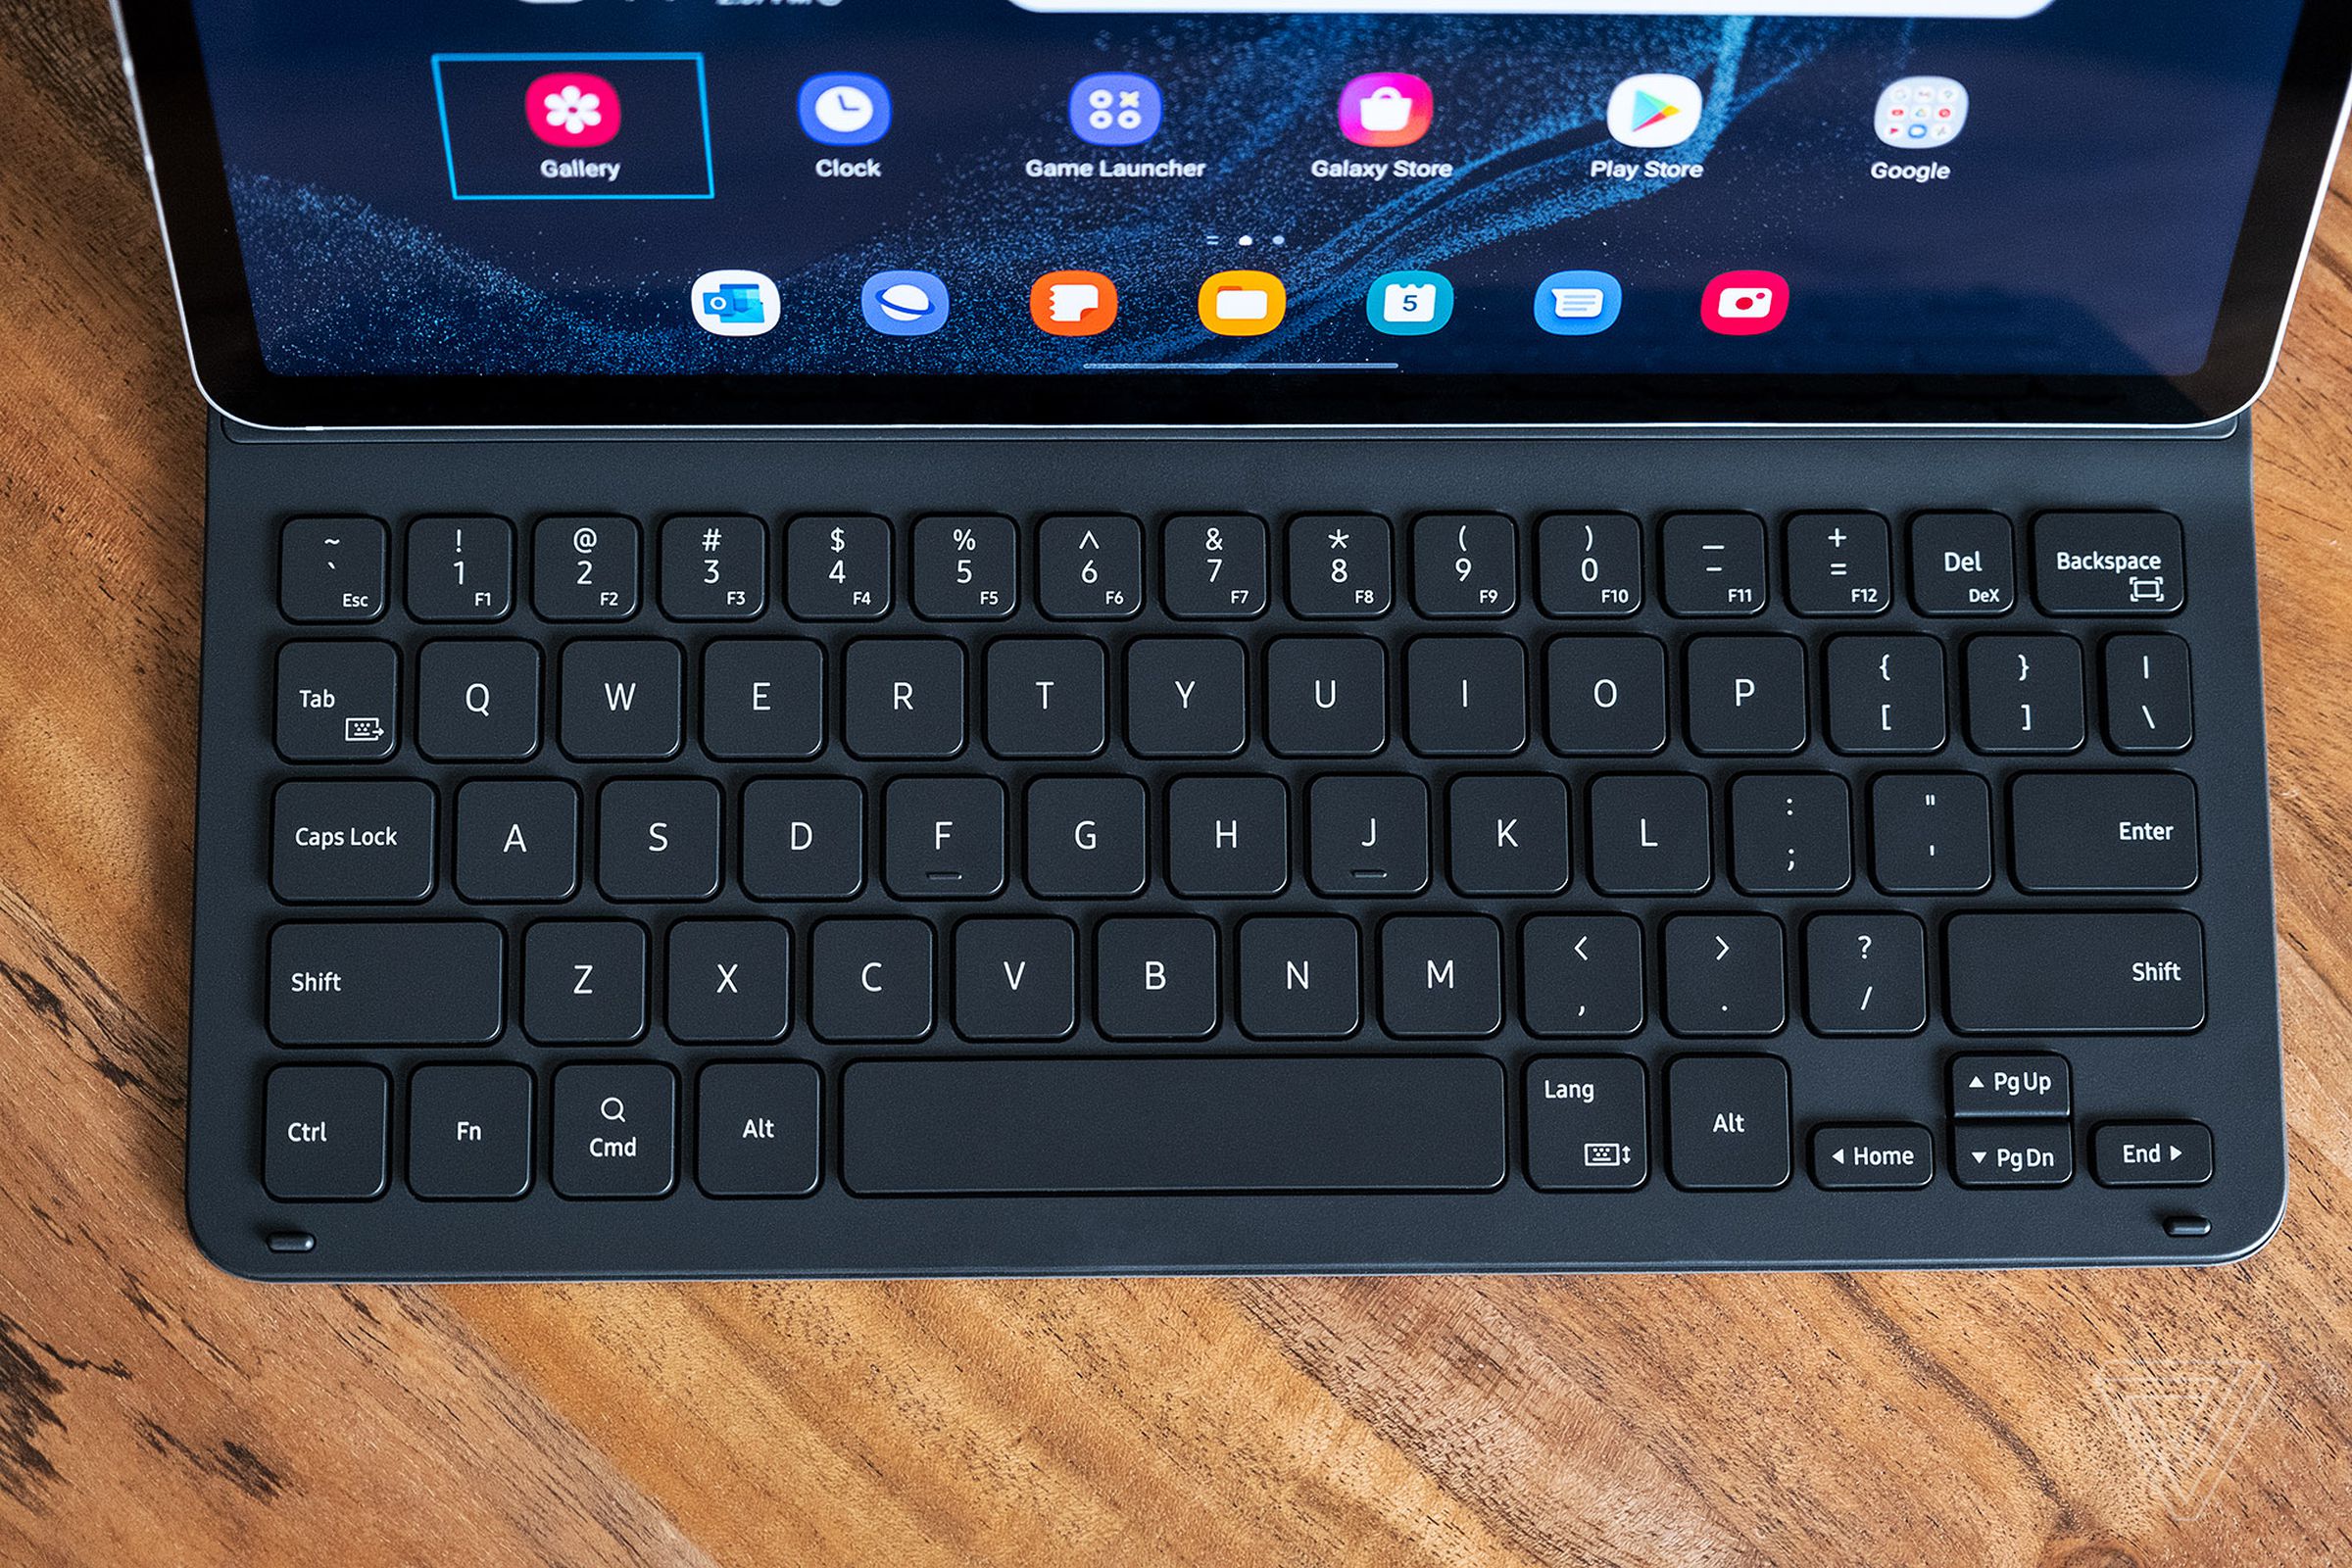 Keyboard cases are available with or without trackpads. The Tab S8’s Book Cover Keyboard (pictured) lacks a function row for common system controls.